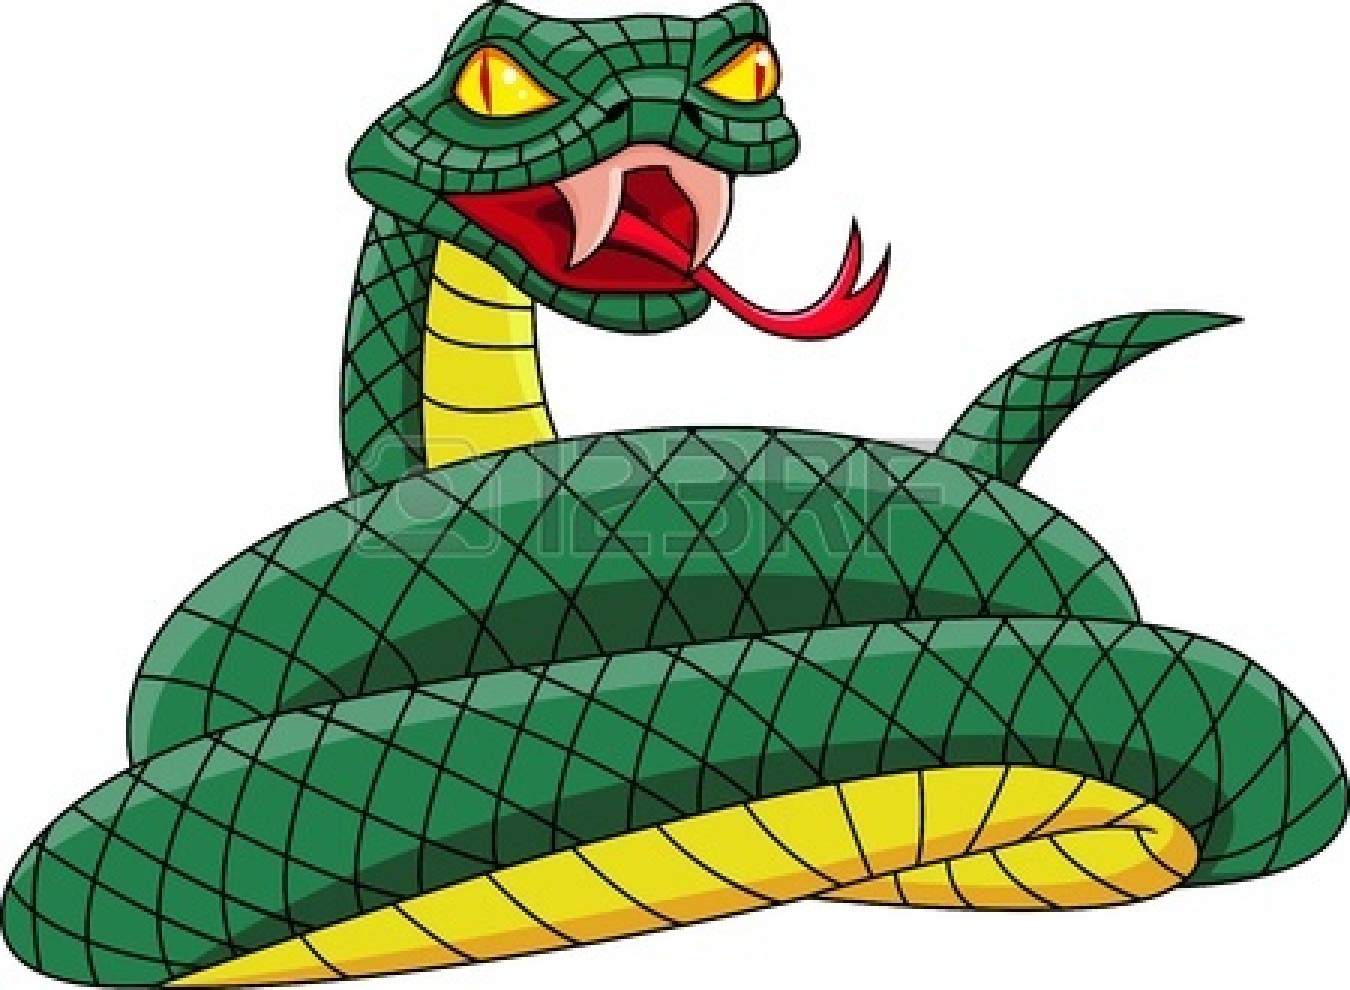 scary snakes clipart - Clip Art Library